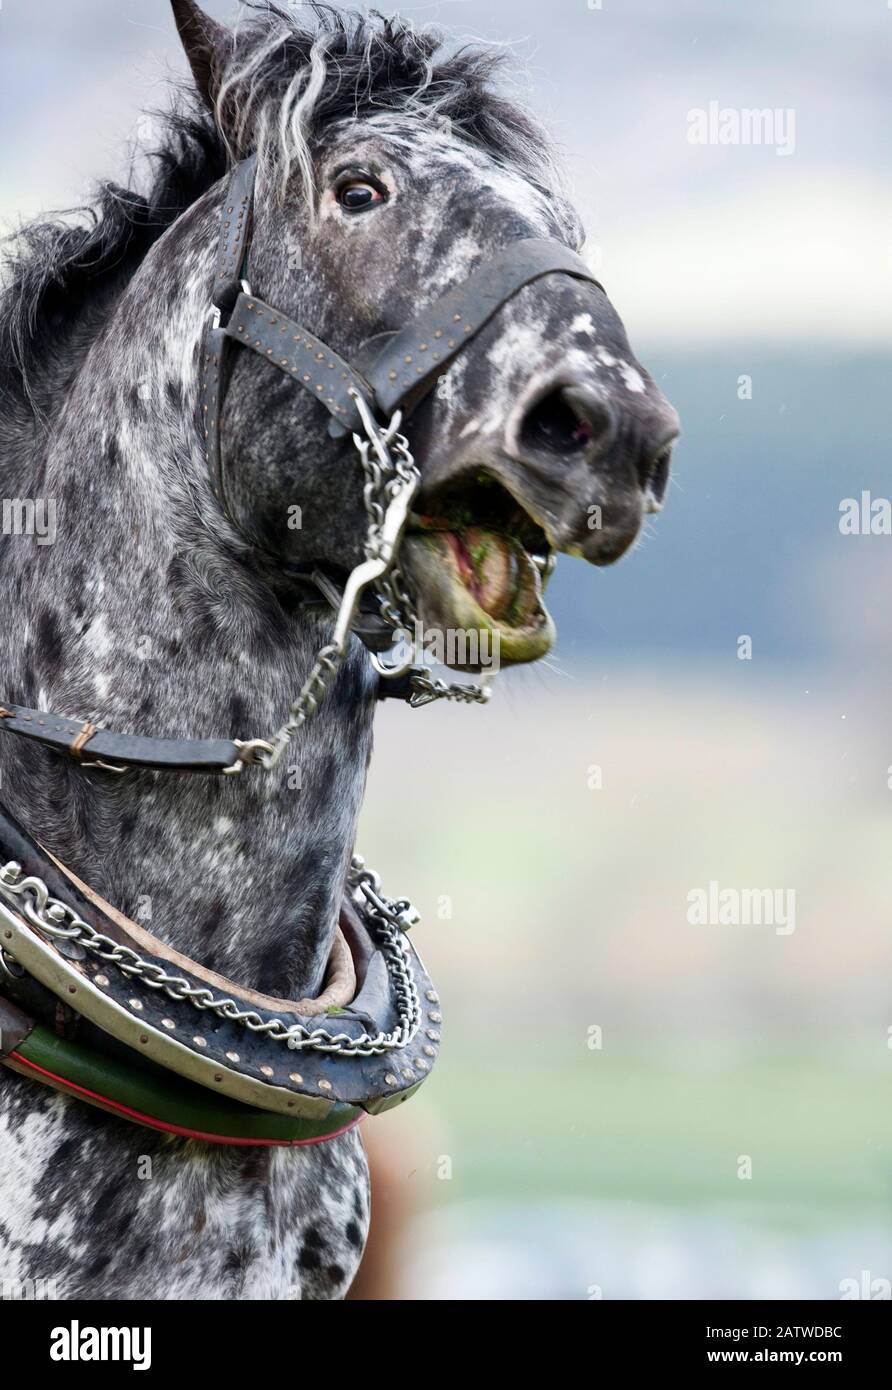 Noriker Horse. Portrait of leopard-spotted adult in harness with collar, protesting. Germany Stock Photo